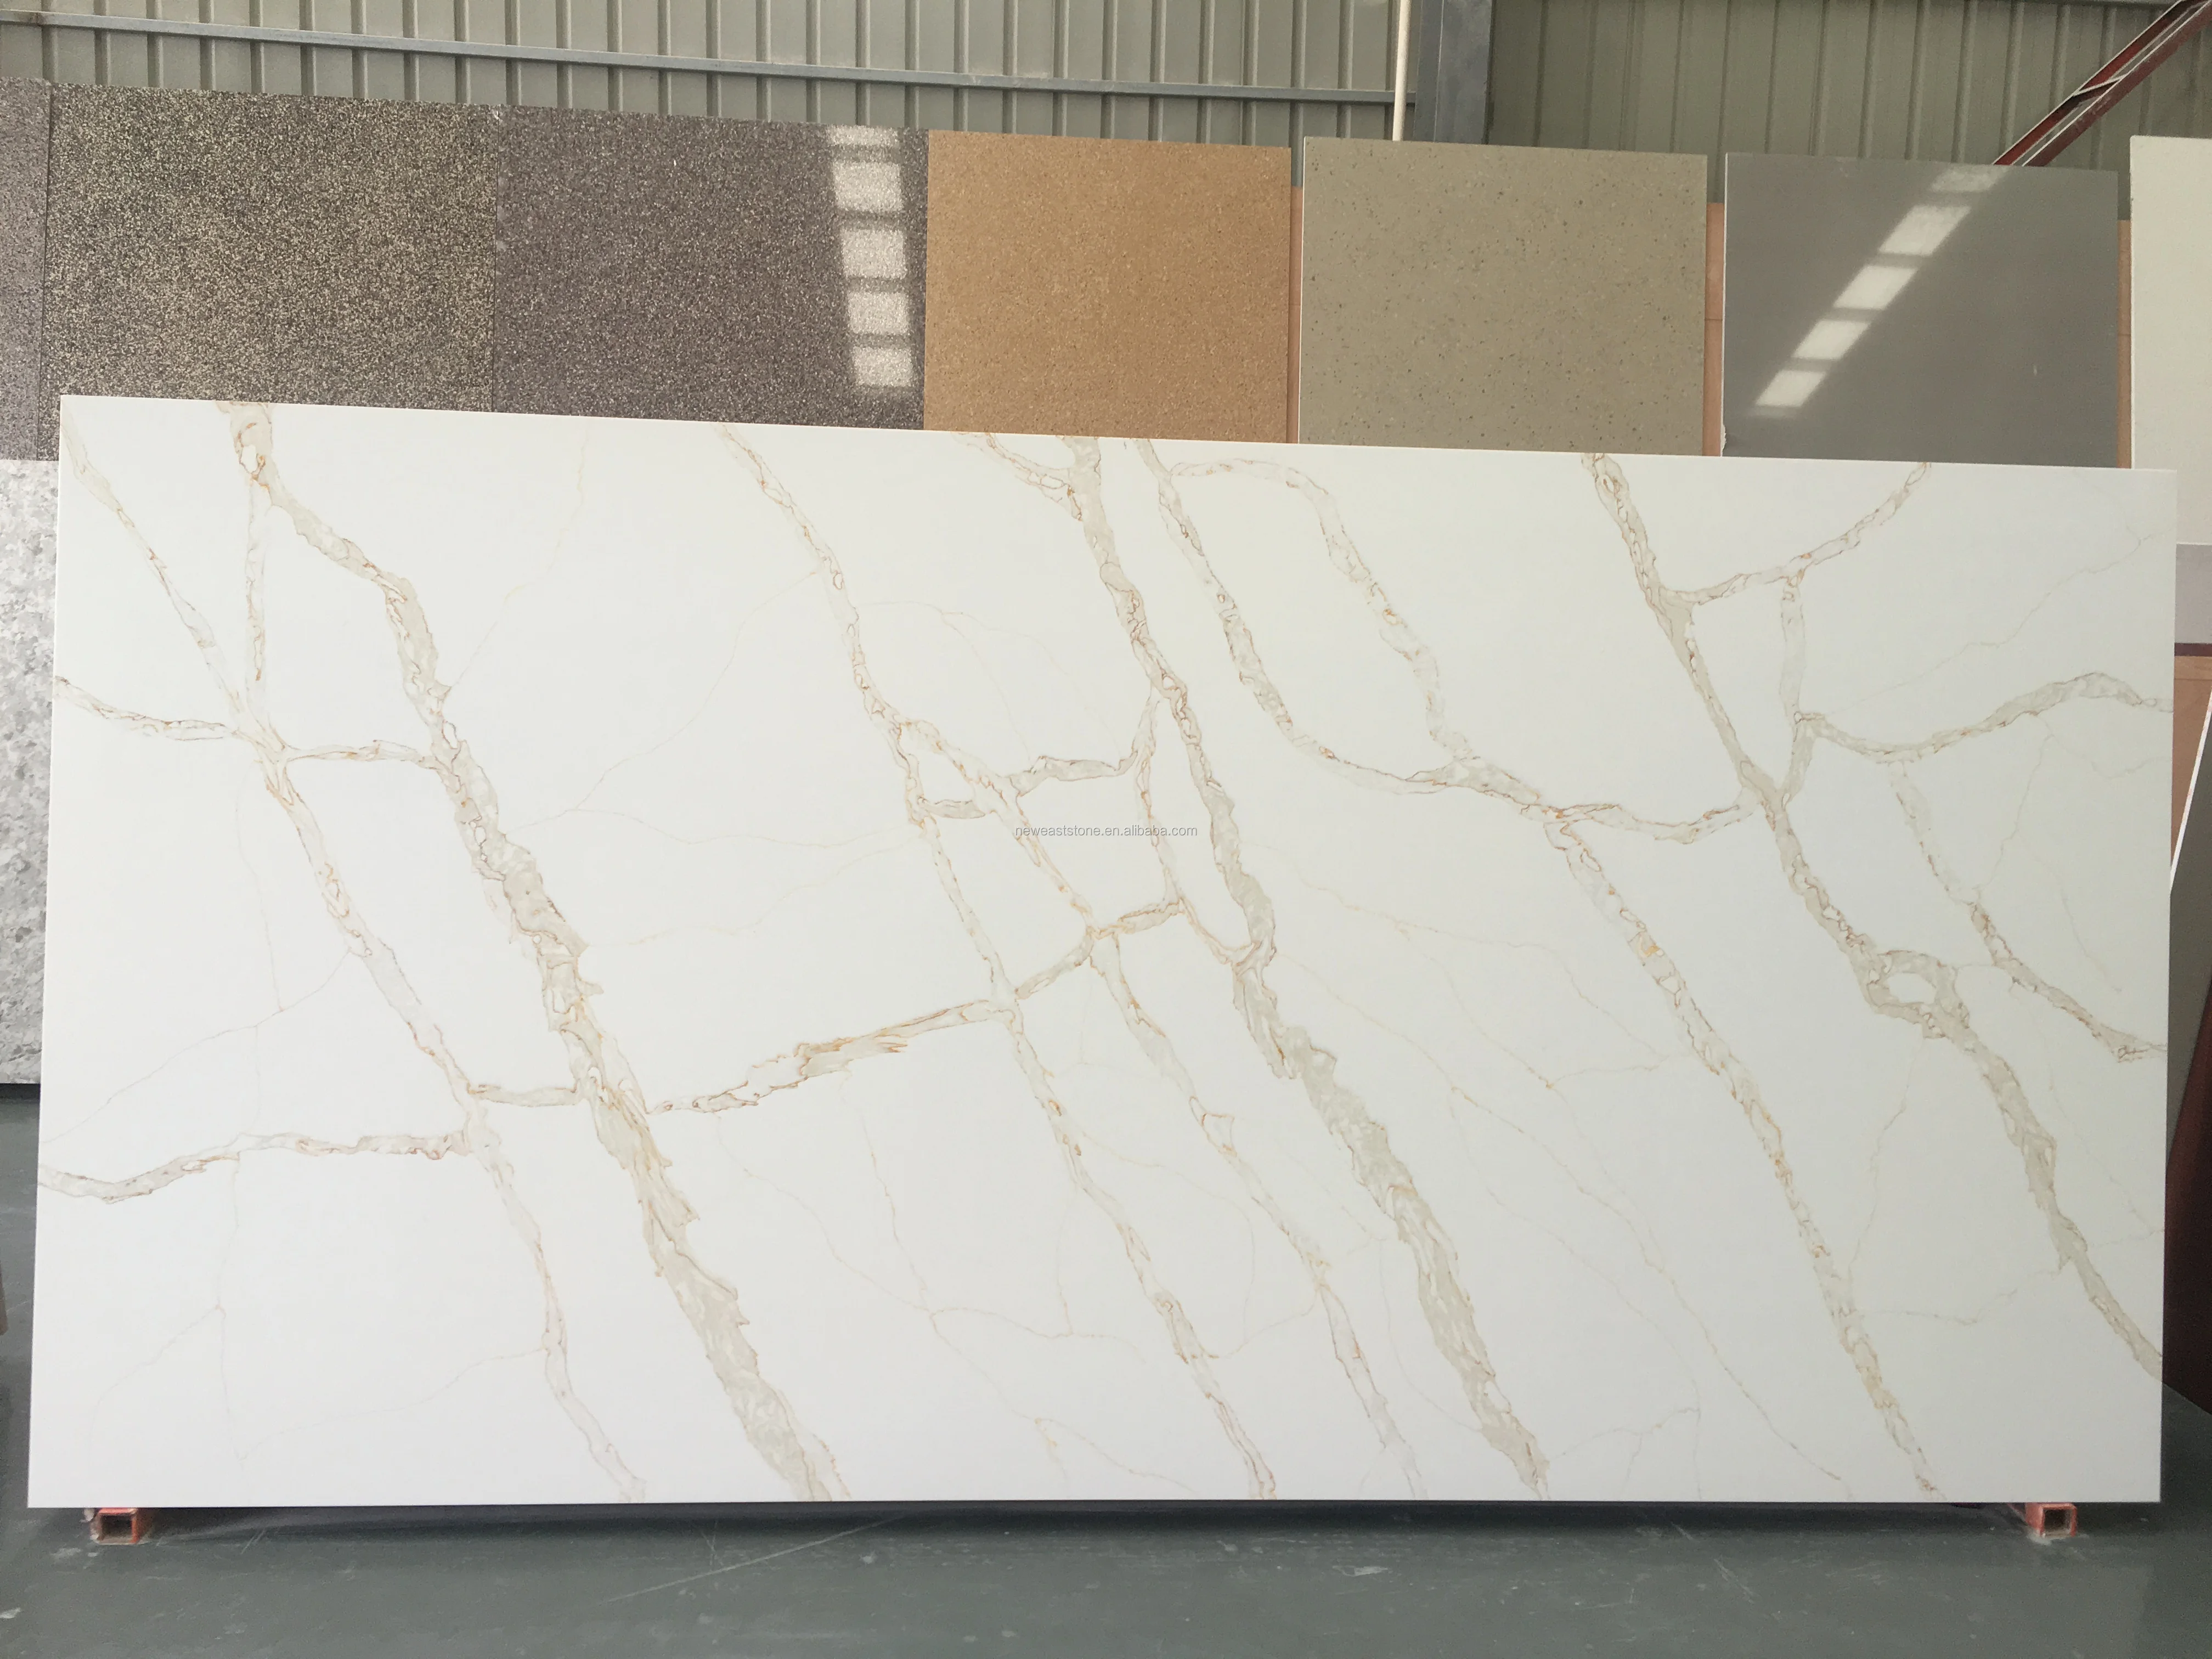 Artificial Calacatta Golden Manila Veins Marble Quartz Slabs For Wall Price  - Buy Artificial Marble Slabs,Marble Slabs For Wall,Calacatta Quartz Slab  Price Product on 